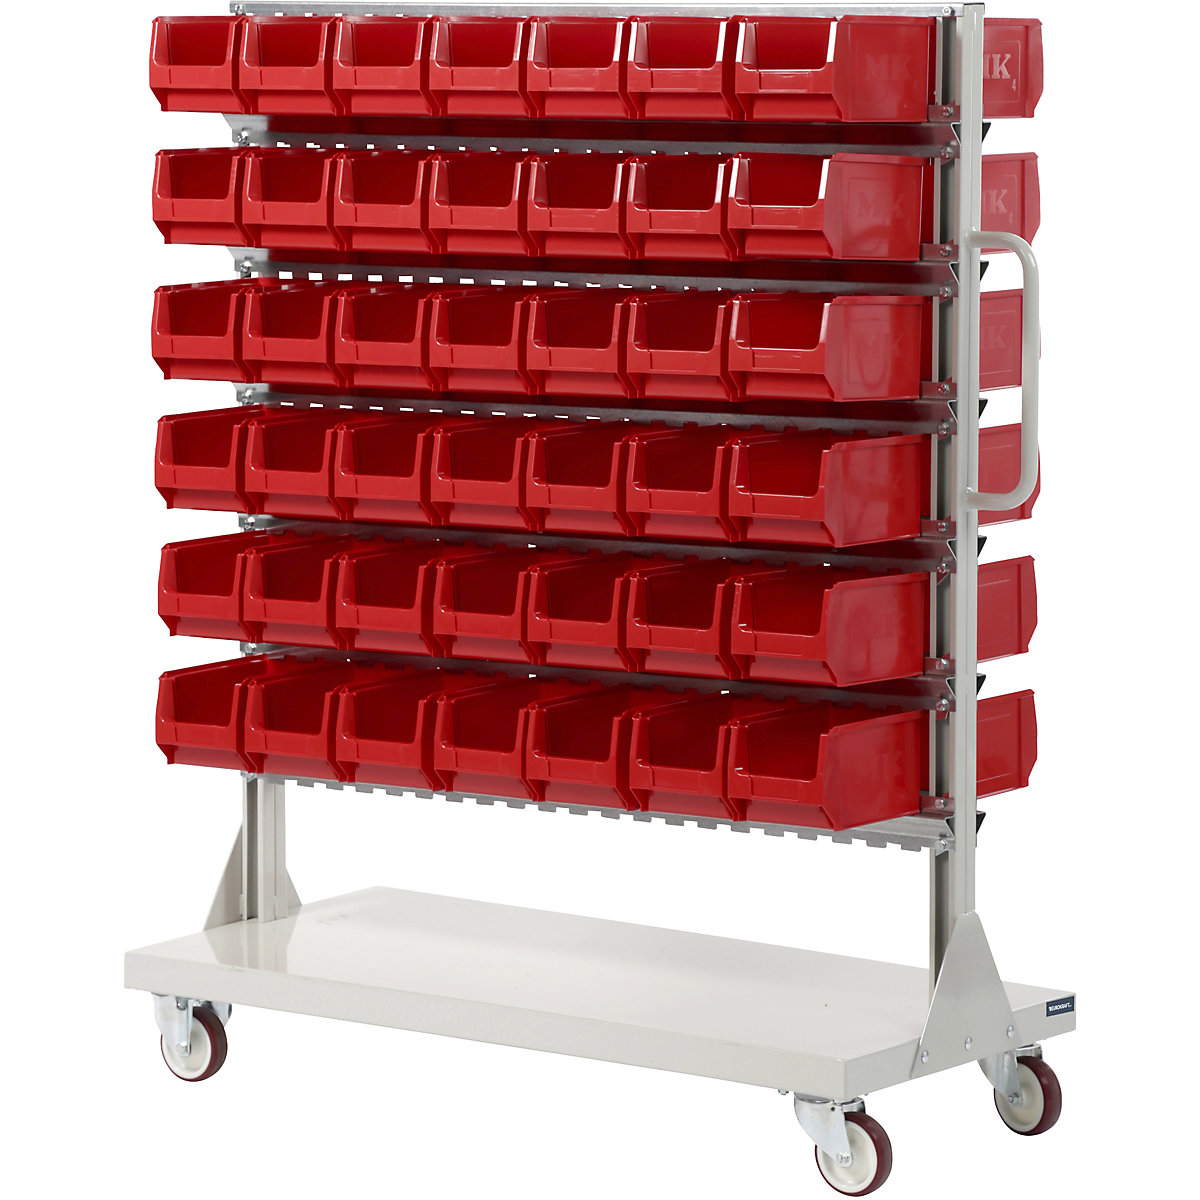 Mobile rack with open fronted storage bins – eurokraft pro